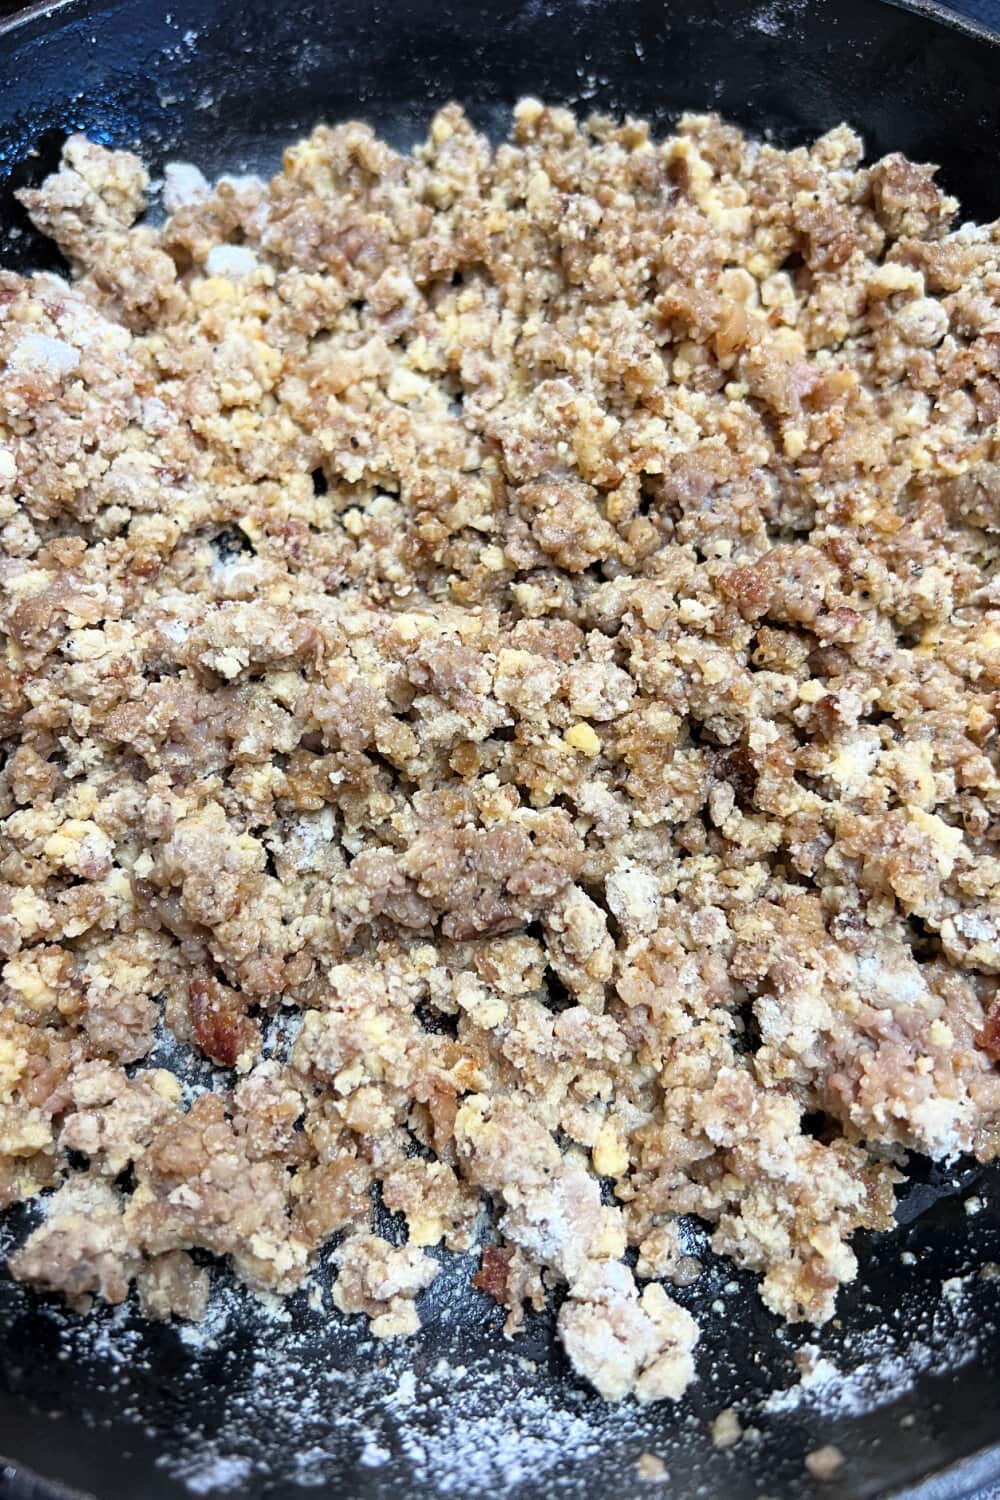 Crumbled and cooked sausage with dry gravy mix incorporated. 